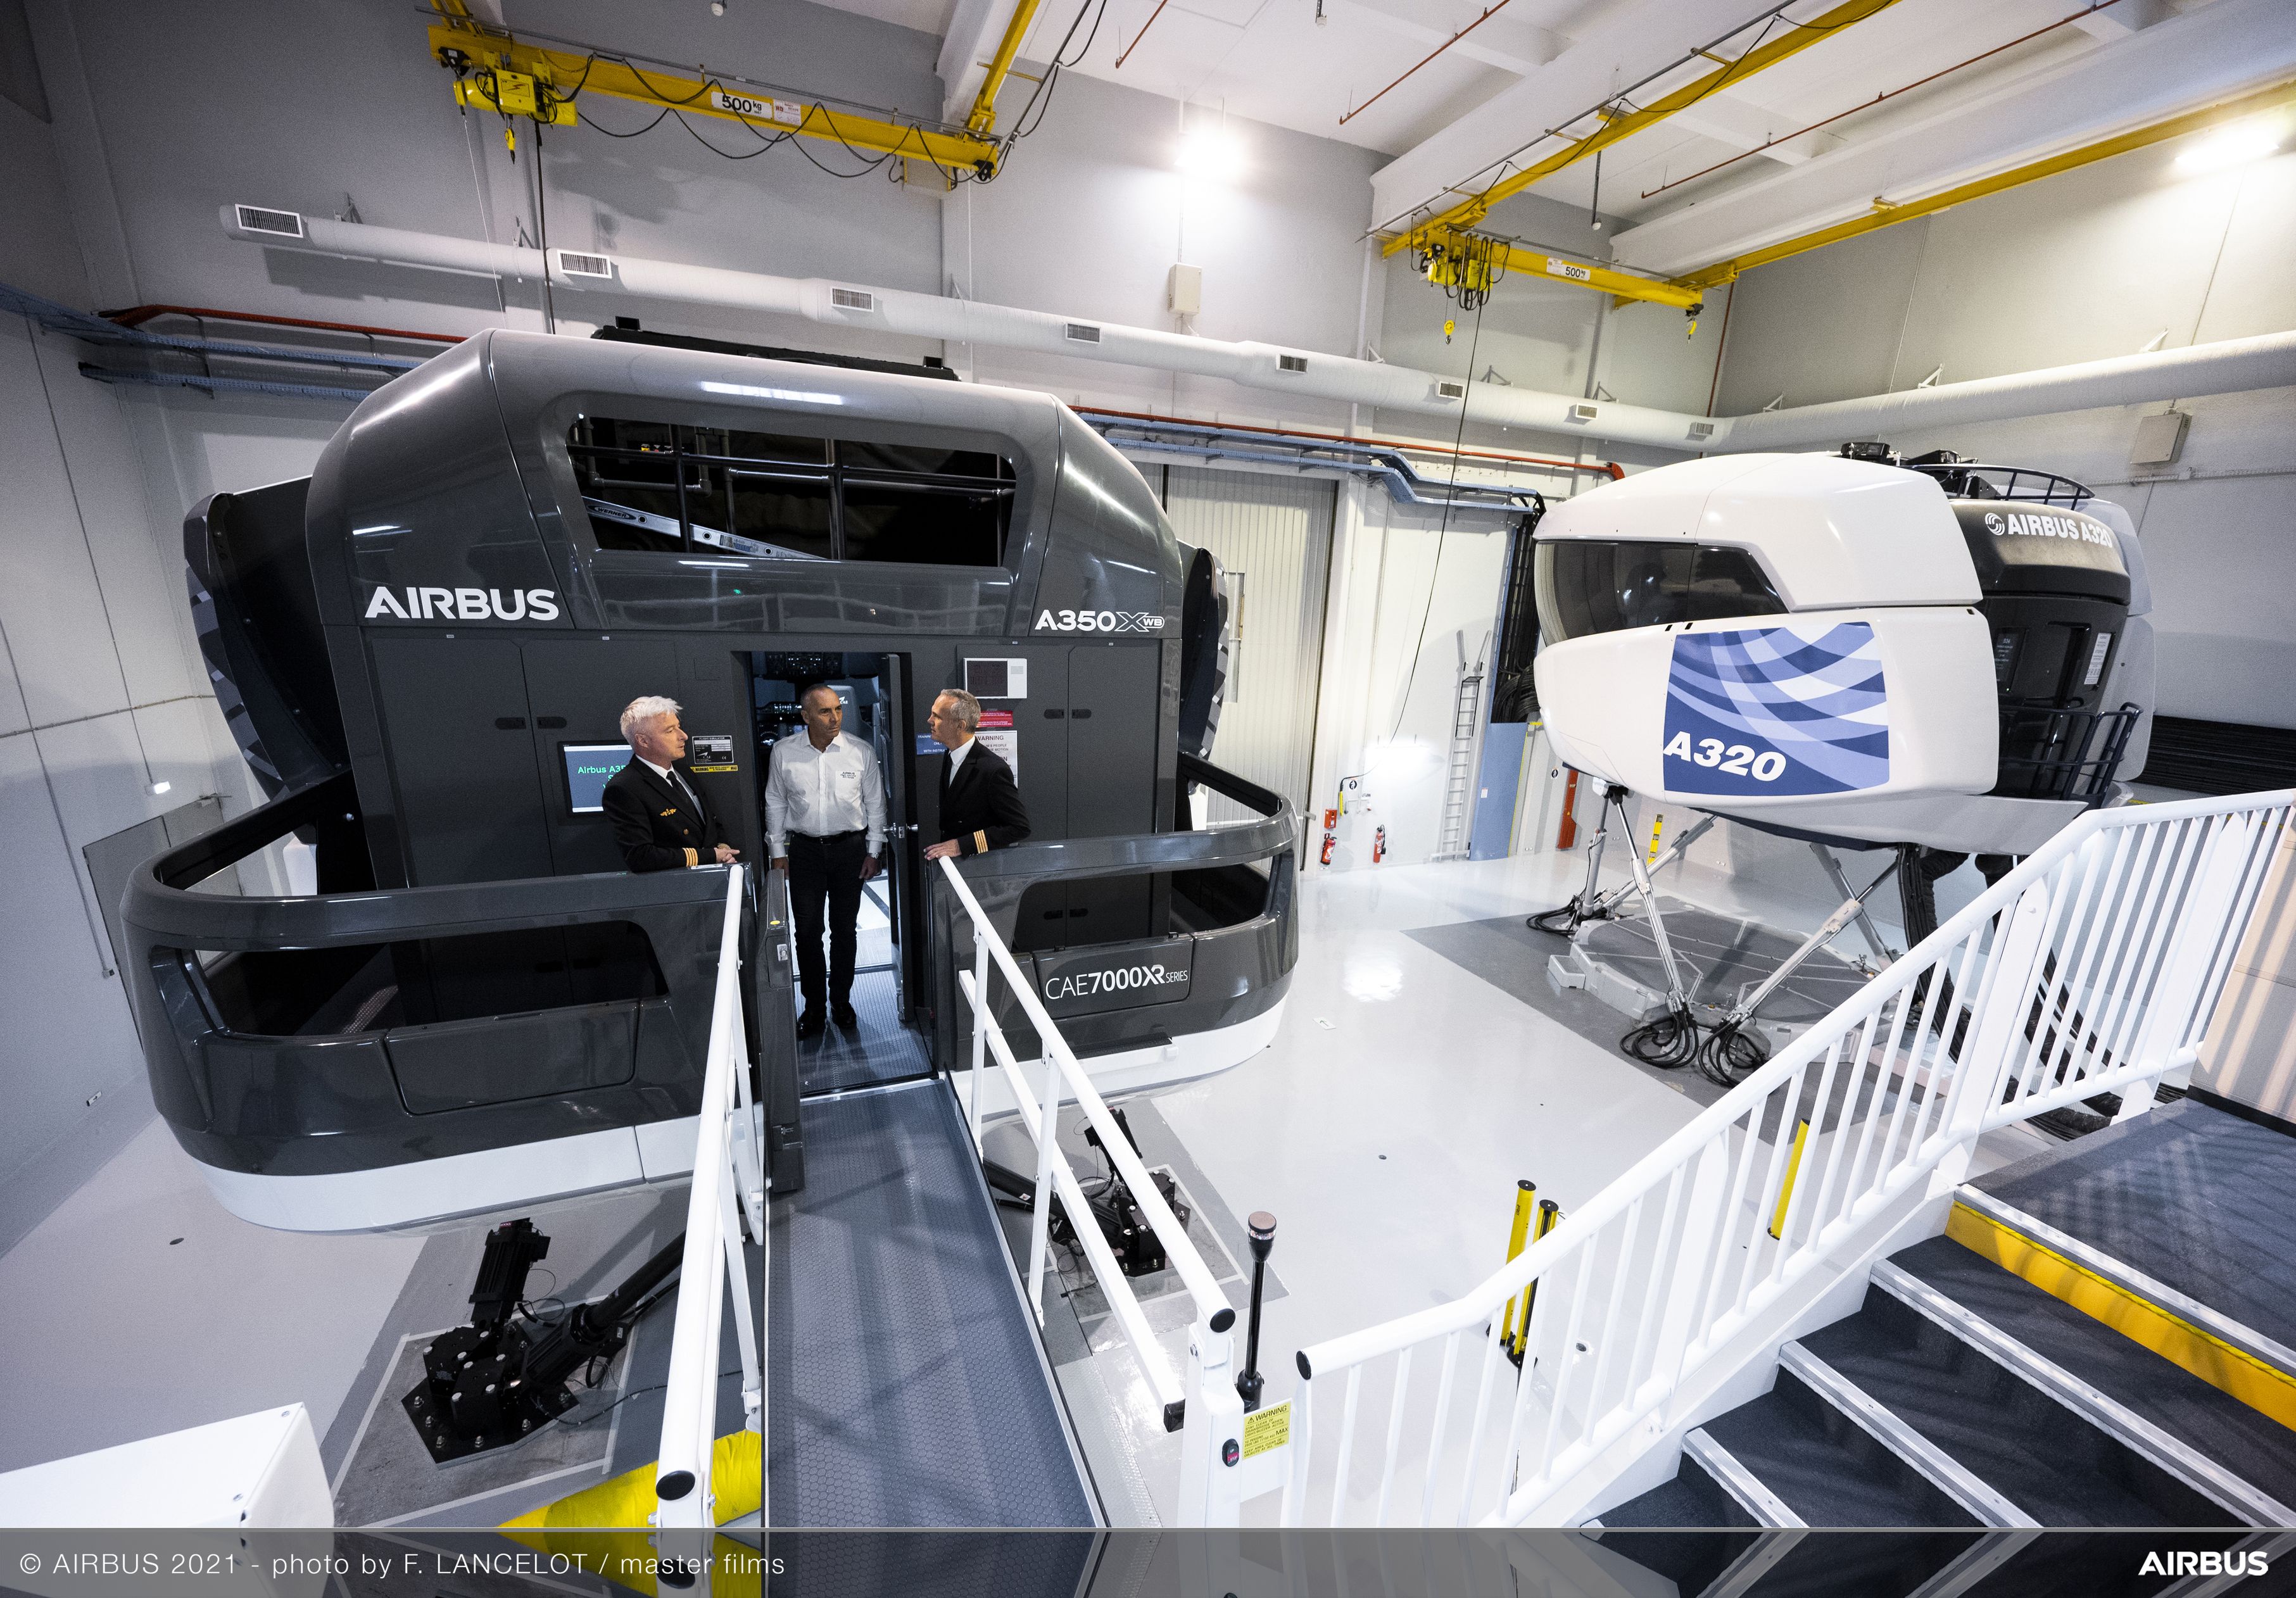 Airbus to set up its first Asia training facility in Delhi - BusinessToday